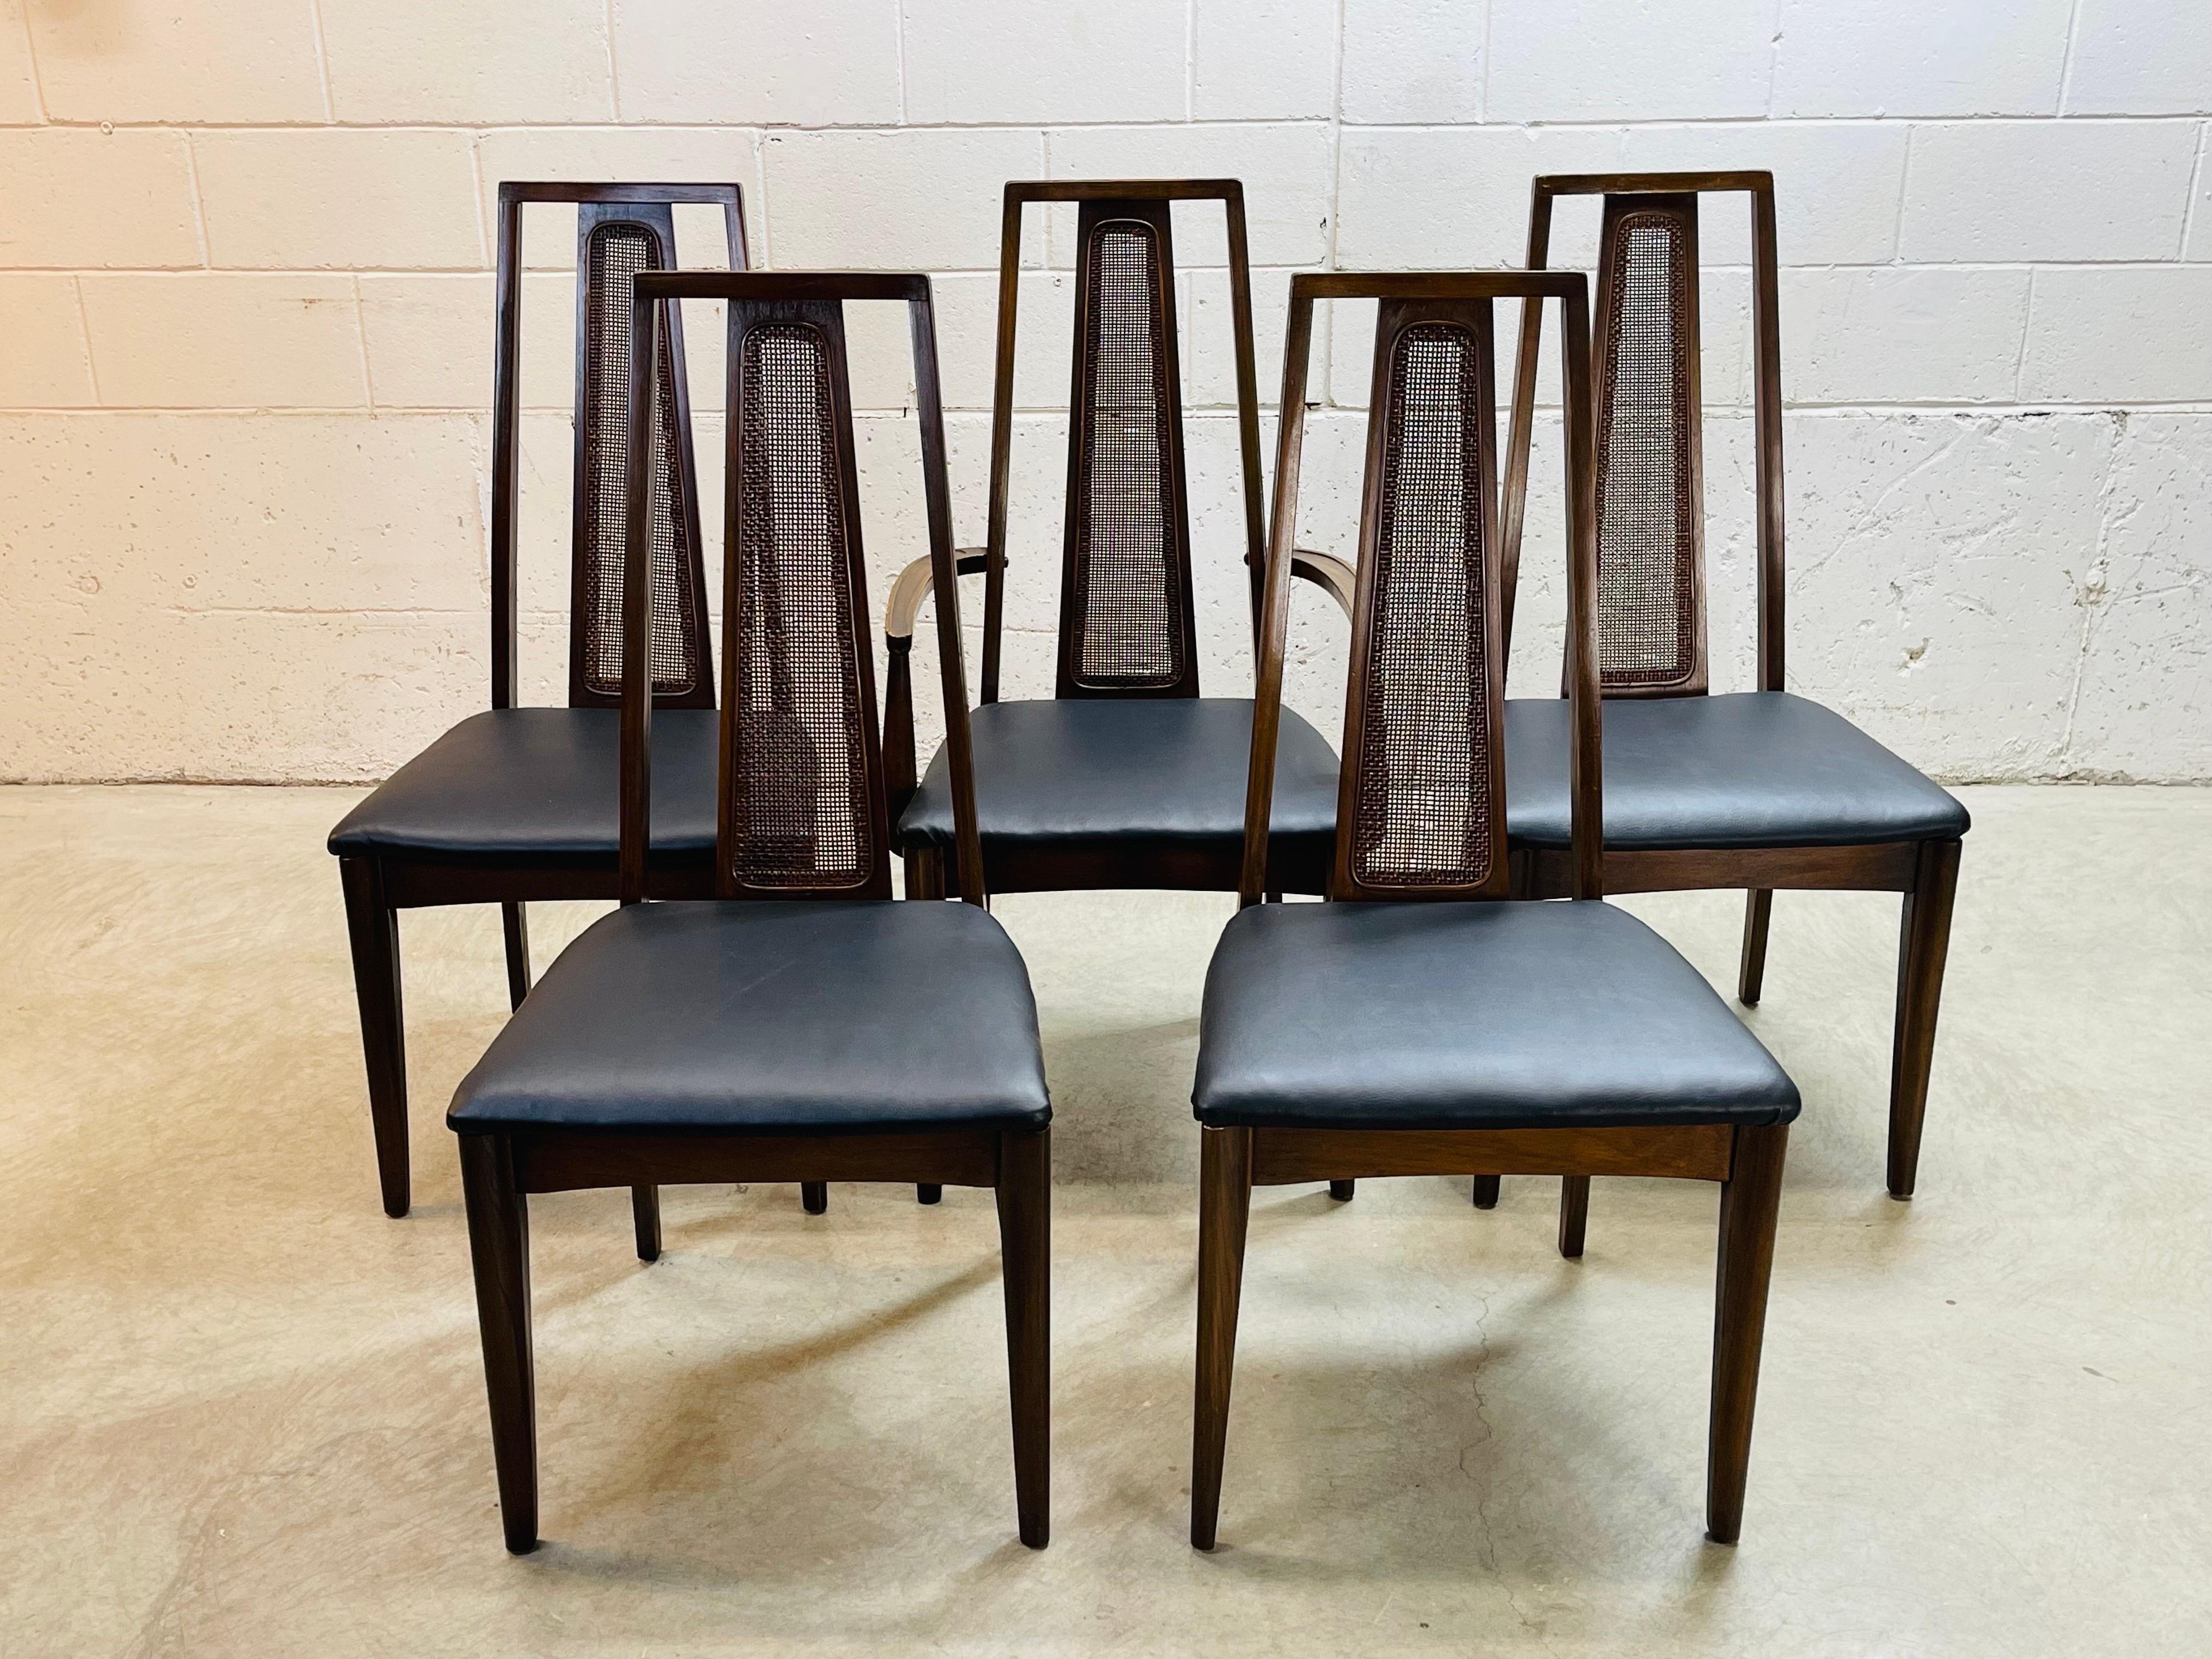 Vintage 1960s cane backed set of five dining room chairs. The set comes with a single captains chair. Arms 25.25”H. New black naugahyde seats. And all the chairs have been refinished. They are all strong and sturdy. No marks.